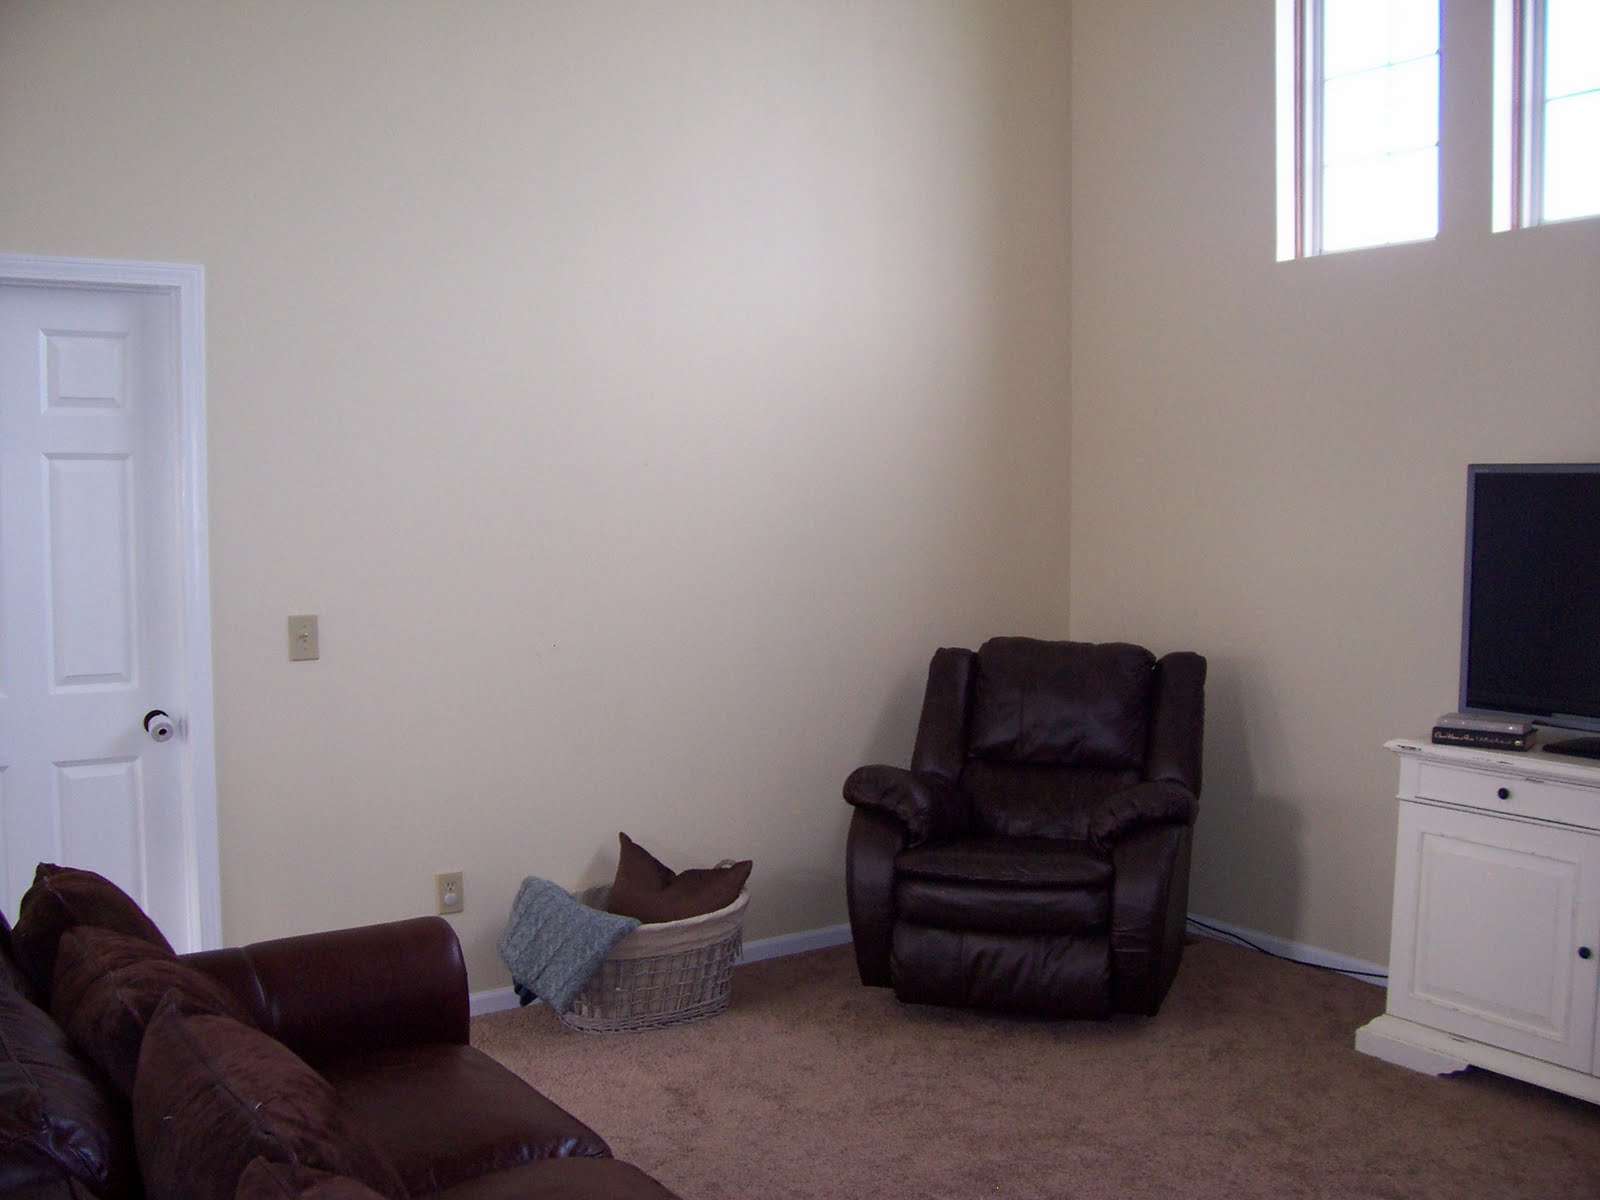 living room is a big blank